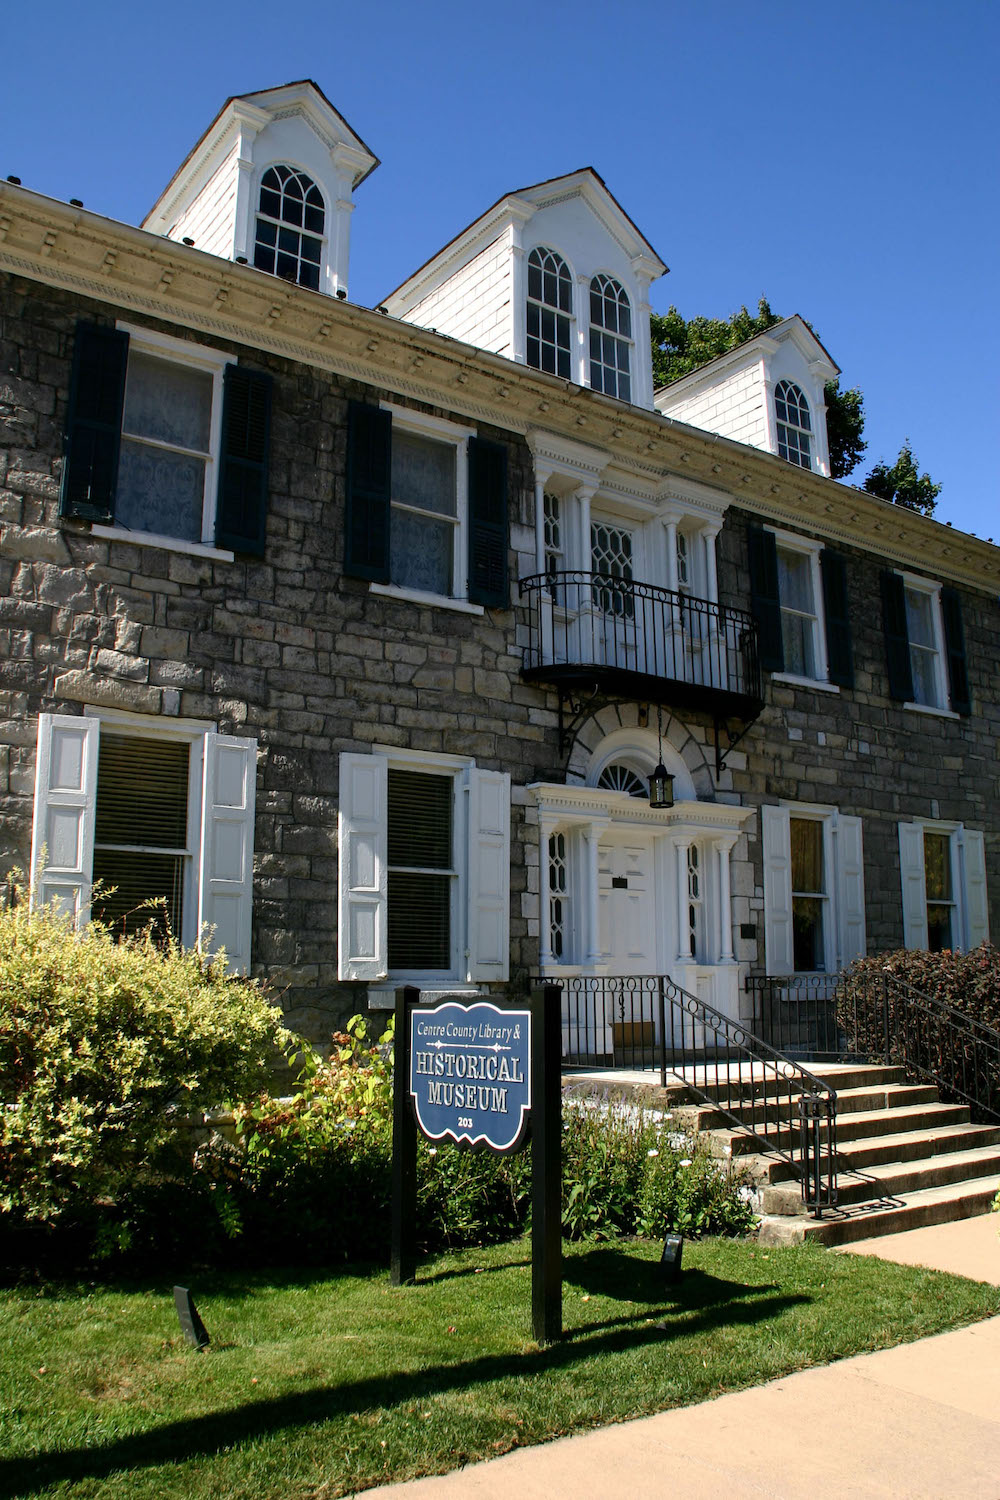 Miles-Potter-Humes House / Centre County Library and Historical Museum